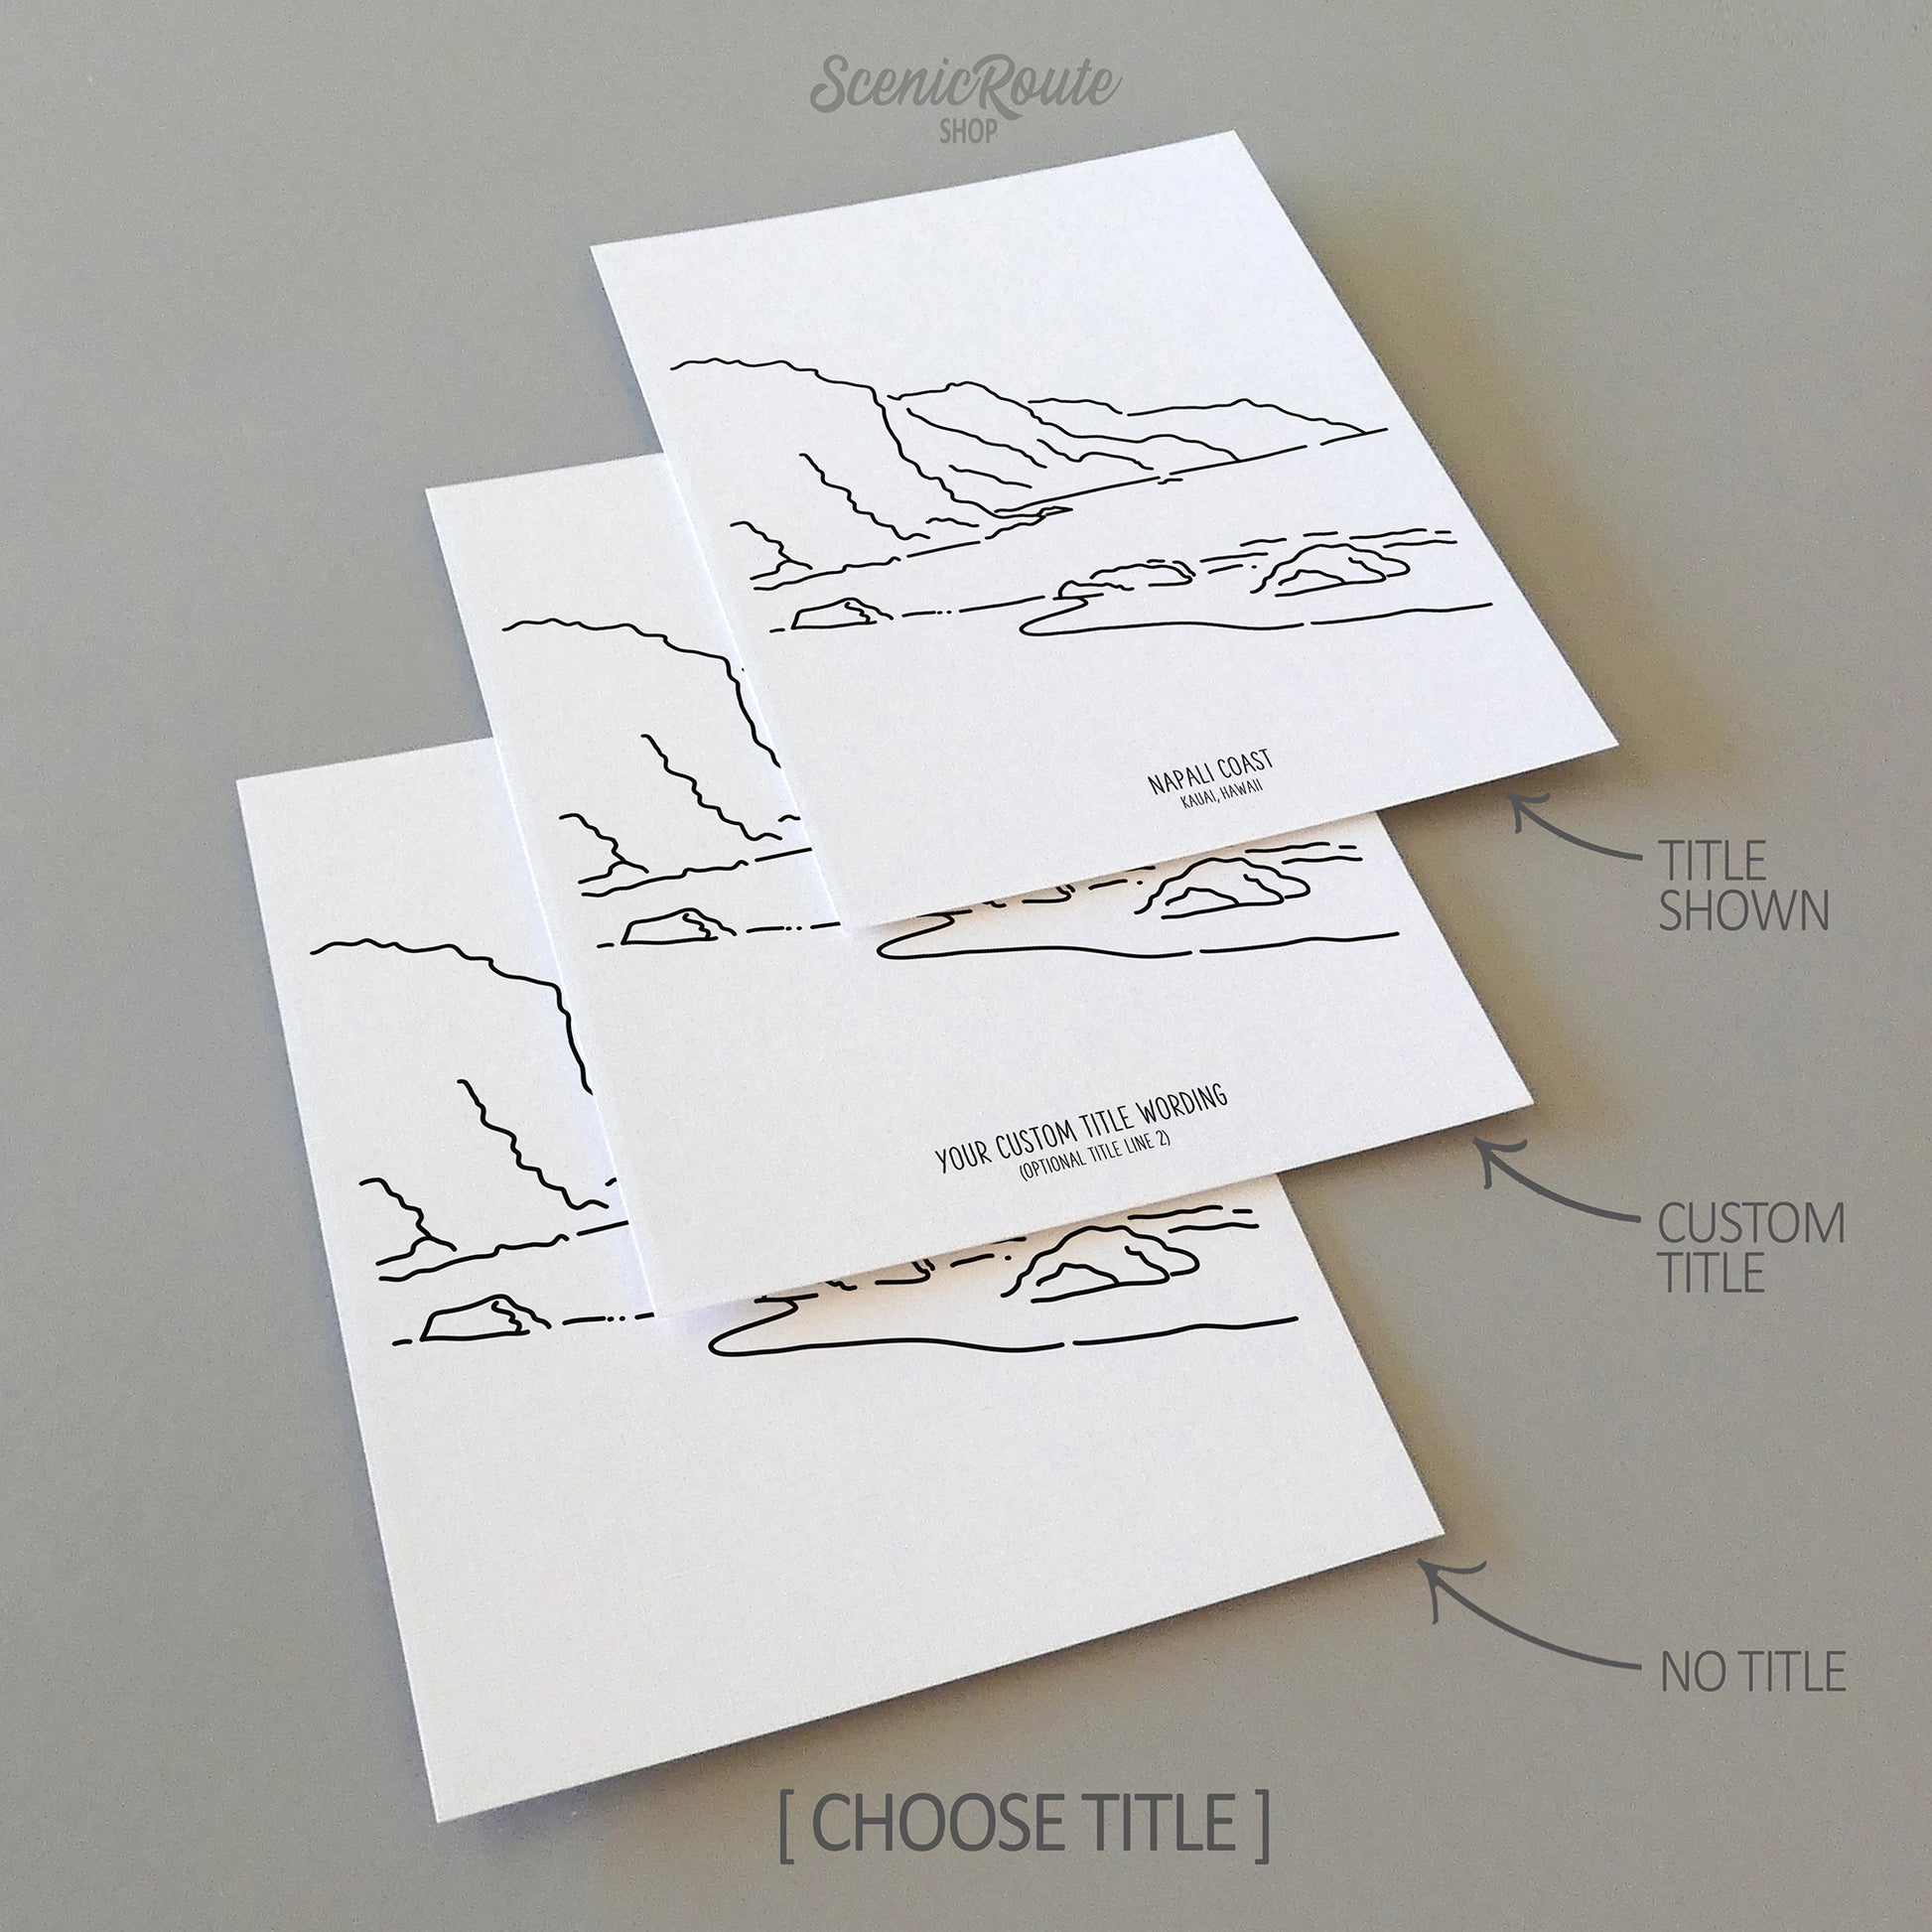 Three line art drawings of the NaPali Coast in Kauai Hawaii on white linen paper with a gray background.  The pieces are shown with title options that can be chosen and personalized.